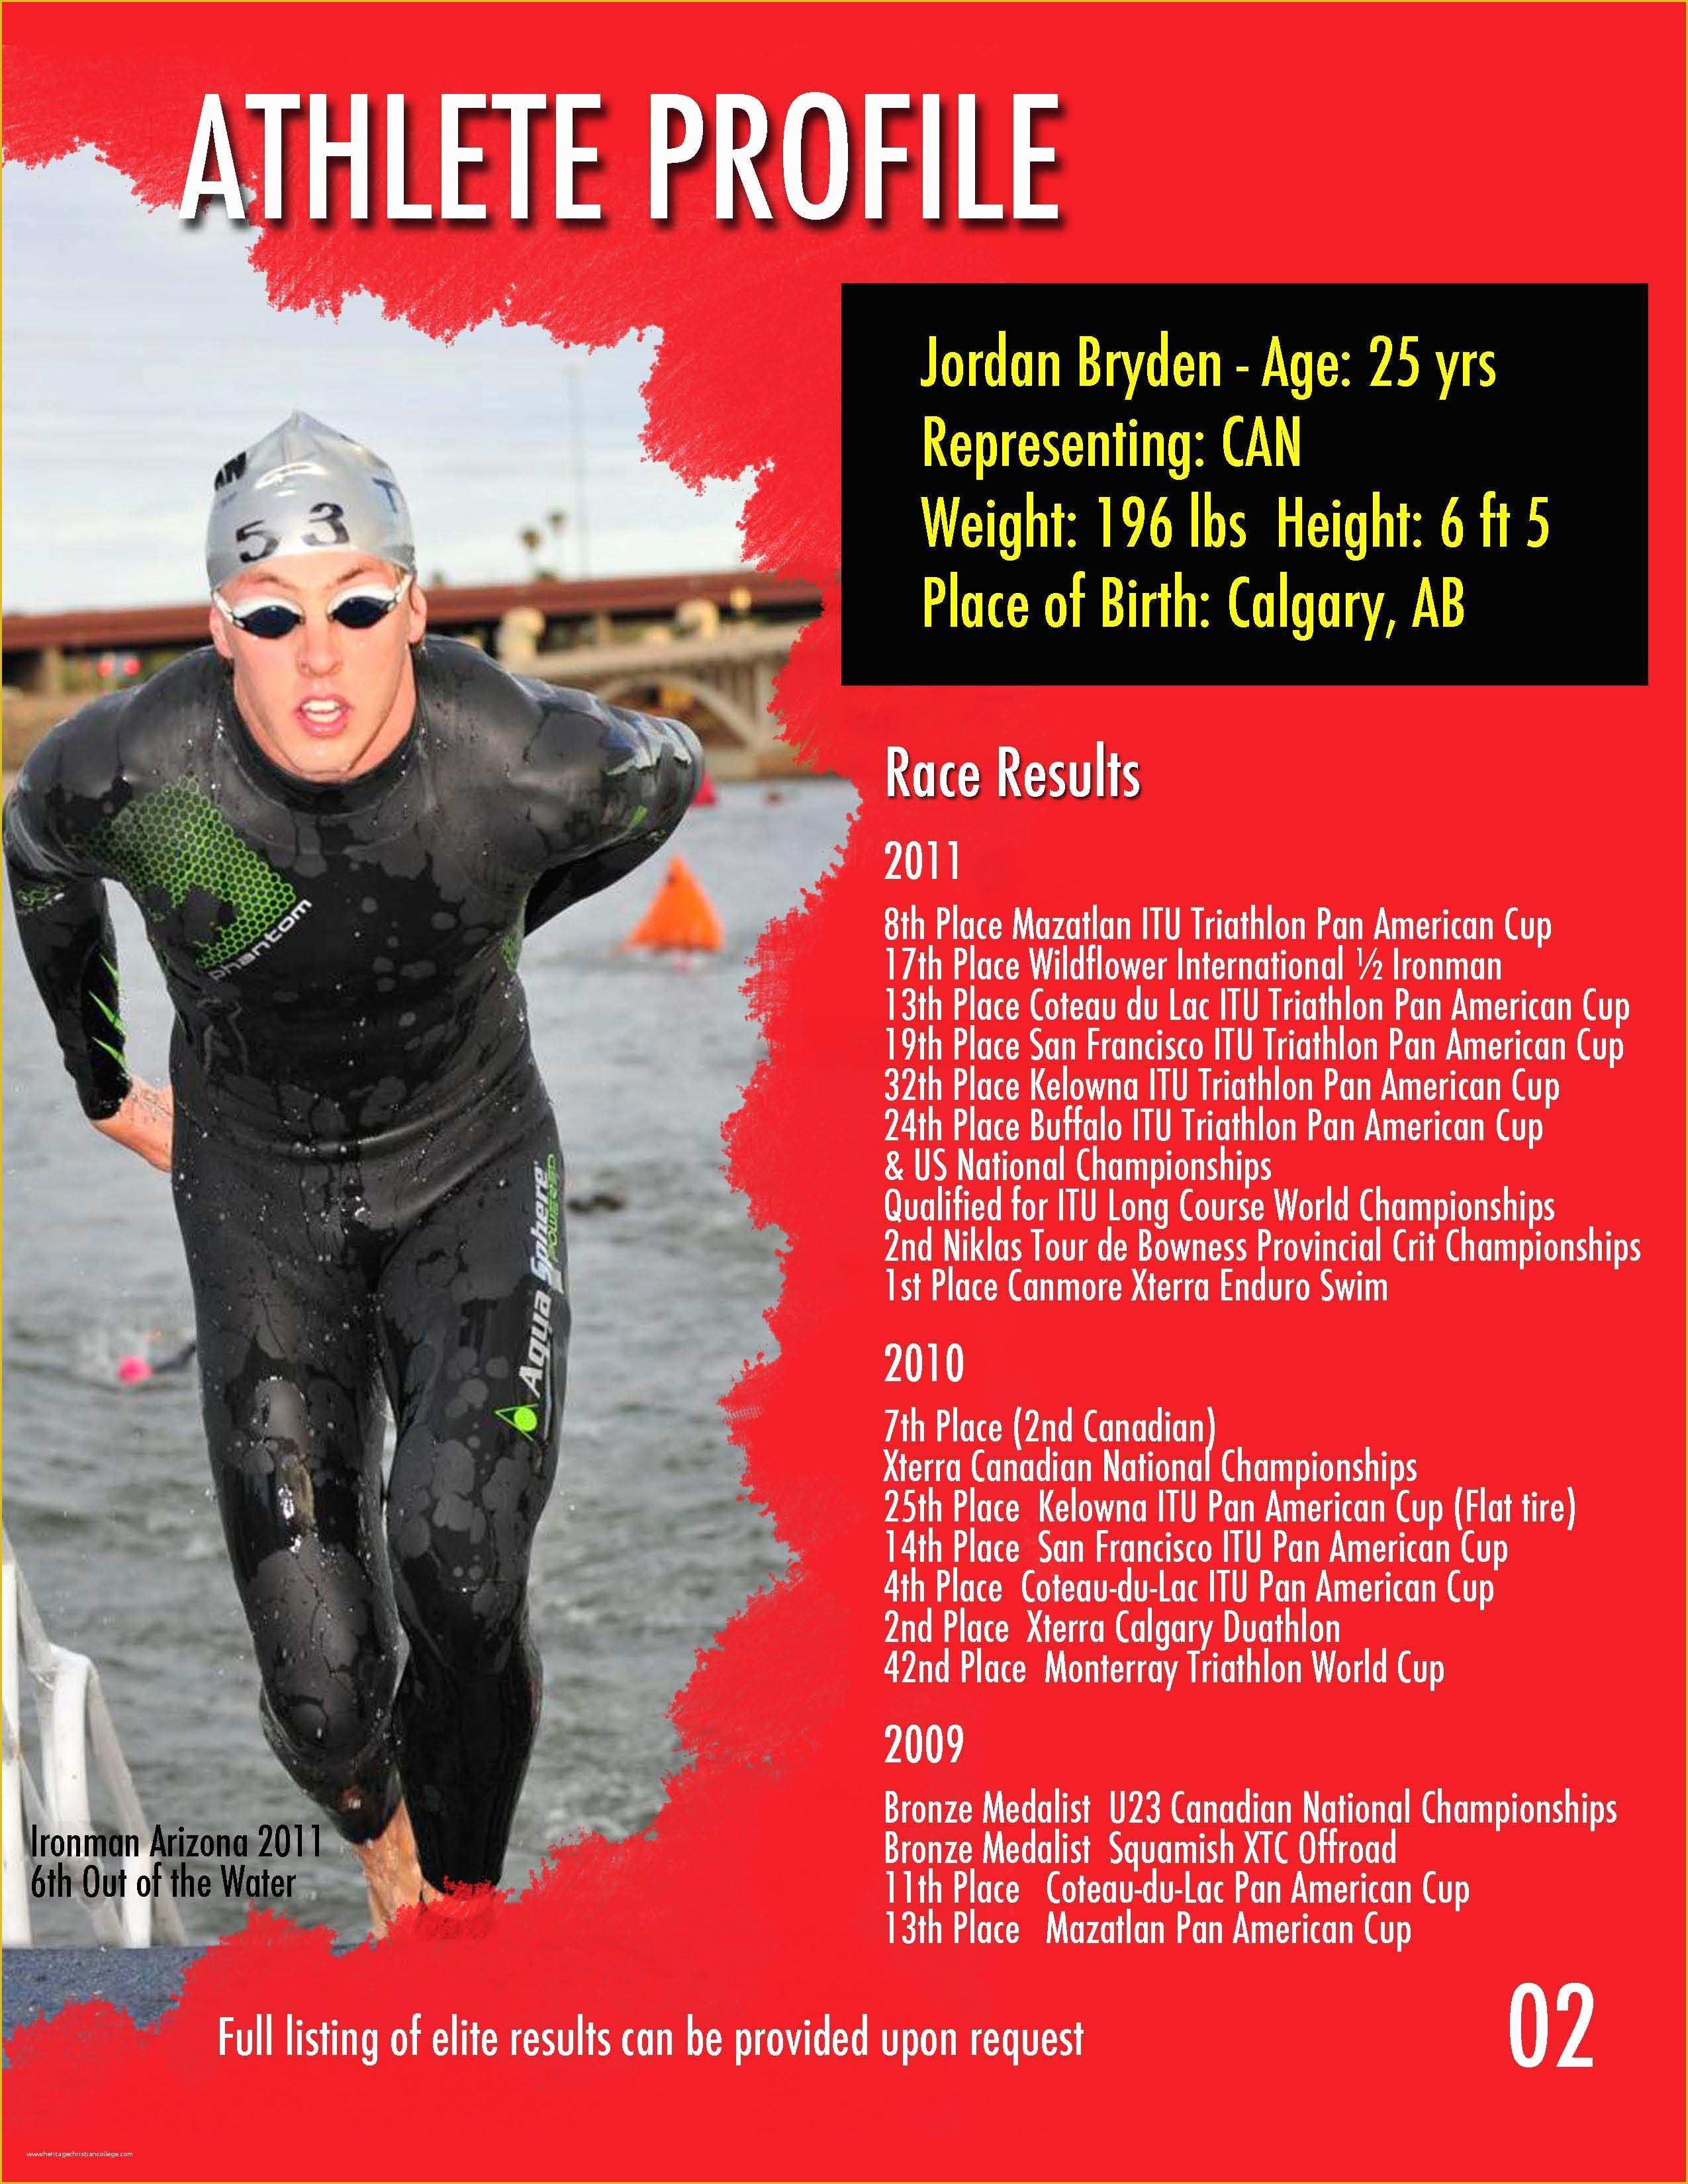 Athlete Profile Template Free Of athlete Profile Page for Jordan Bryden Professional